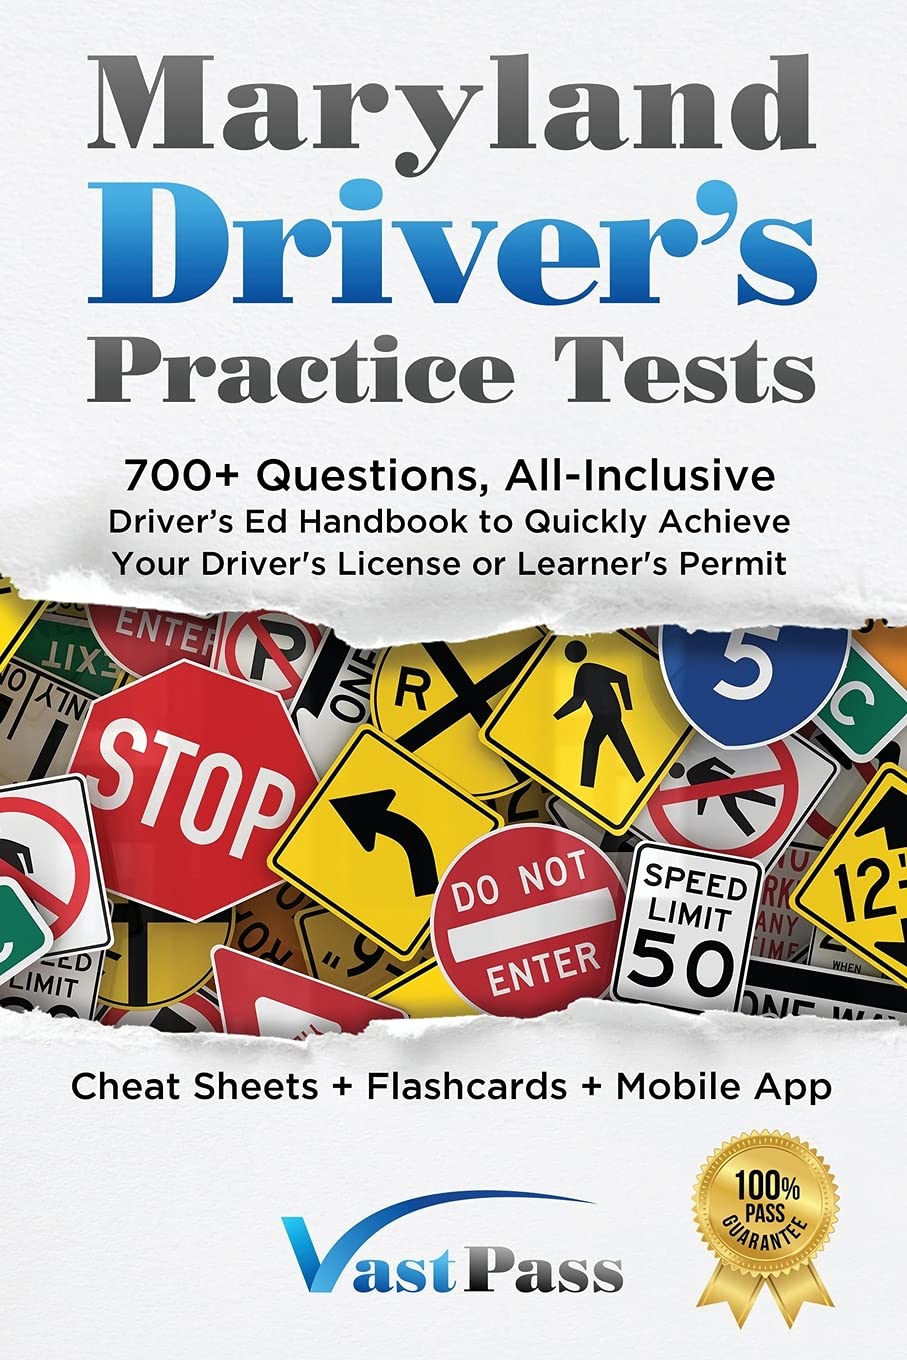 Maryland Driver's Practice Tests 700+ Questions, All-Inclusive Driver's Ed Handbook to Quickly achieve your Driver's License or Learner's Permit - SureShot Books Publishing LLC